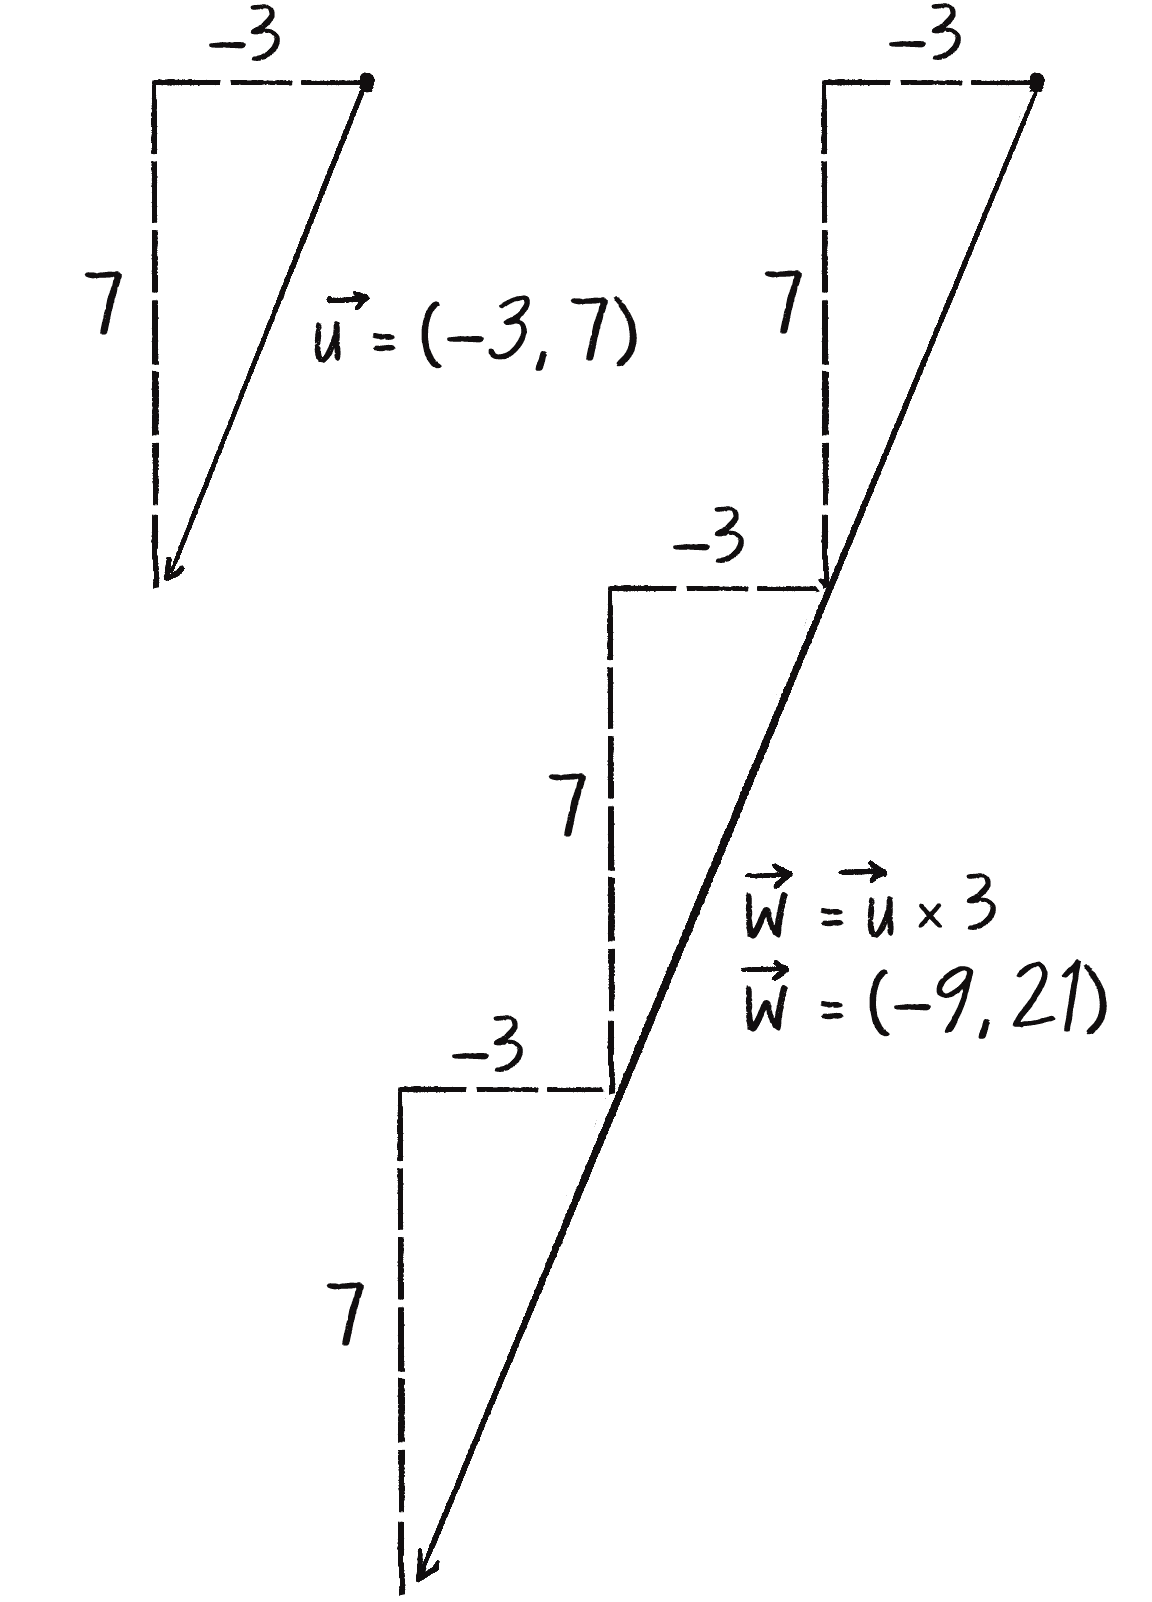 Figure 1.9: Scaling a vector with multiplication